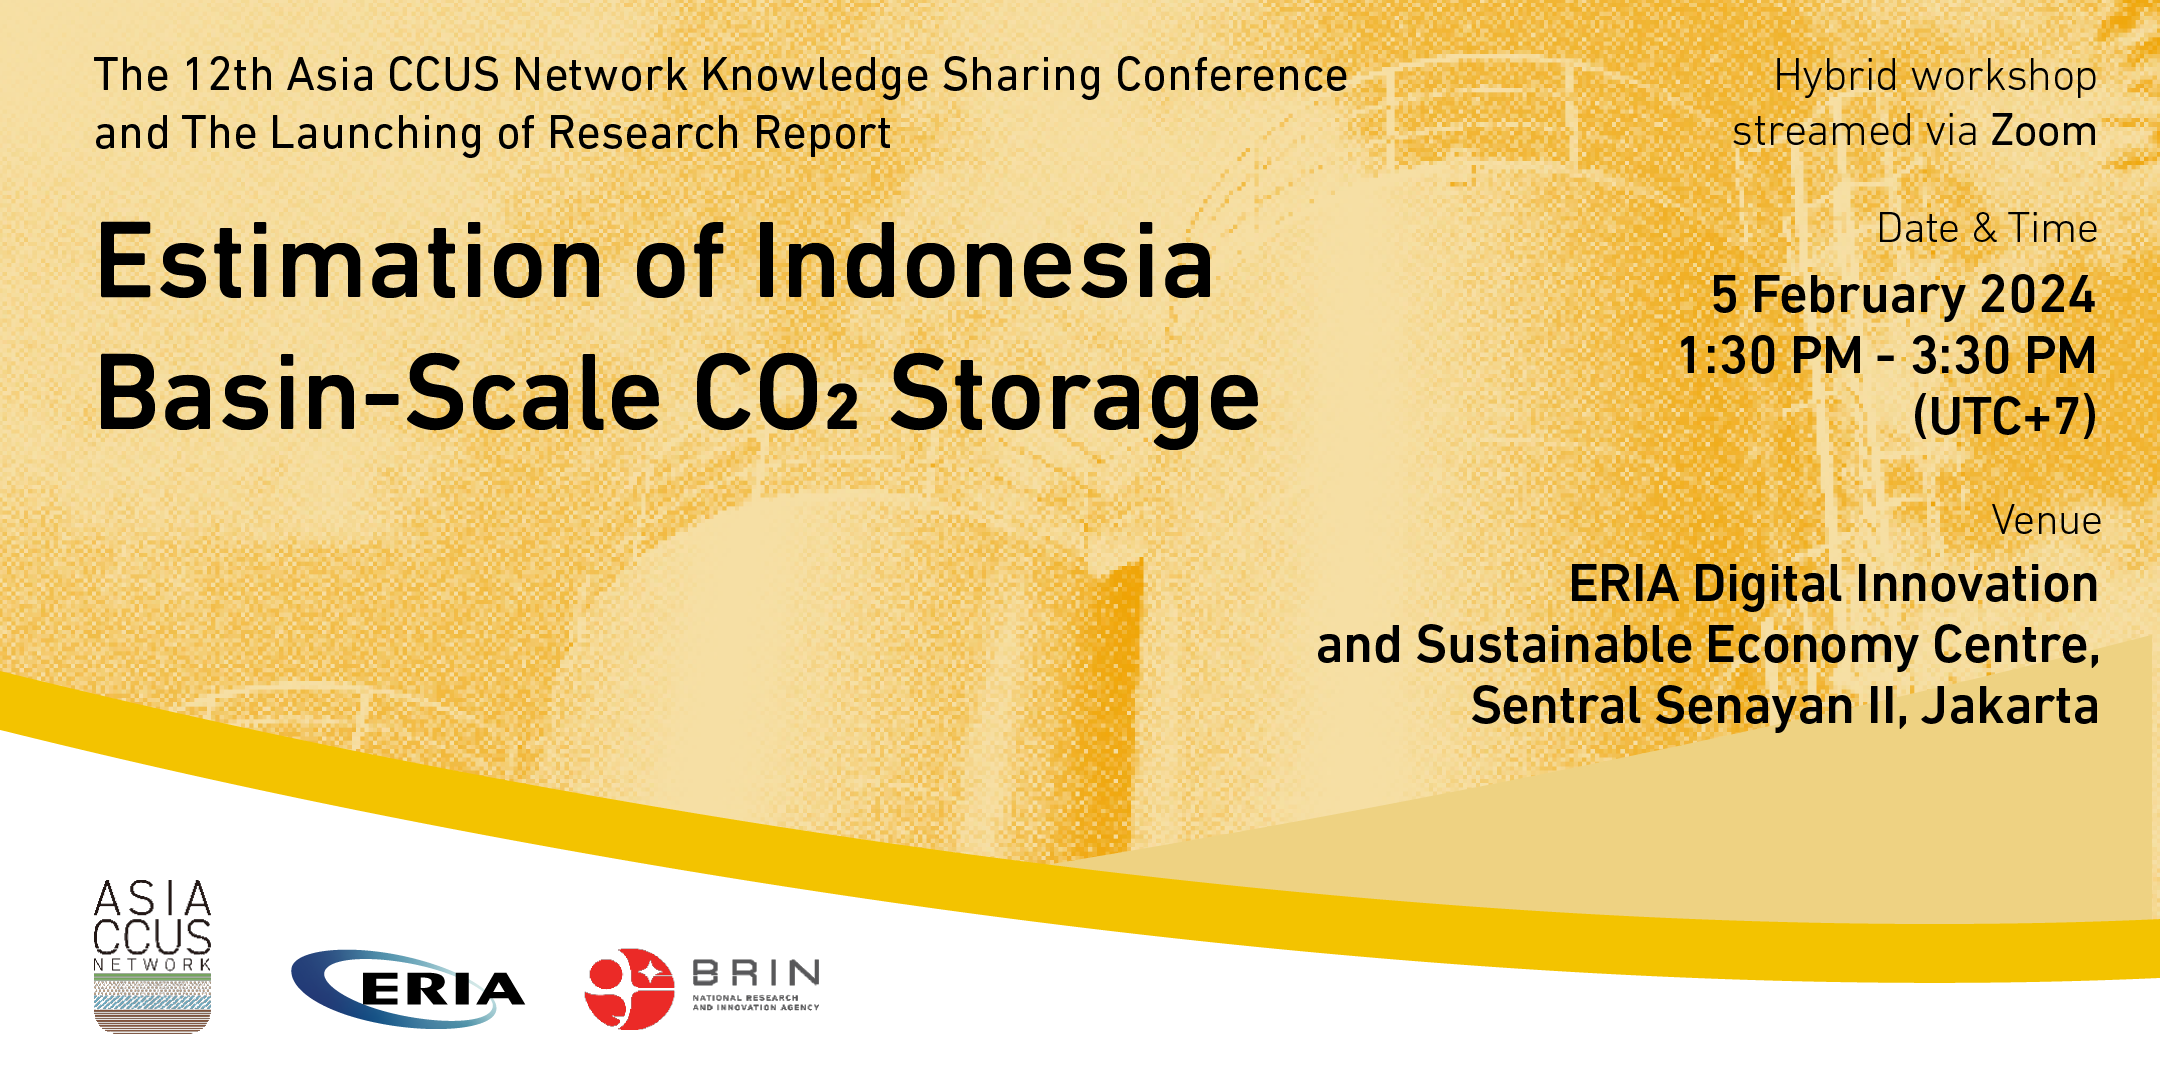 The 12th Asia CCUS Network (ACN) Knowledge Sharing Conference and The Launching of Research Report 'Estimation of Indonesia Basin-Scale CO2 Storage'